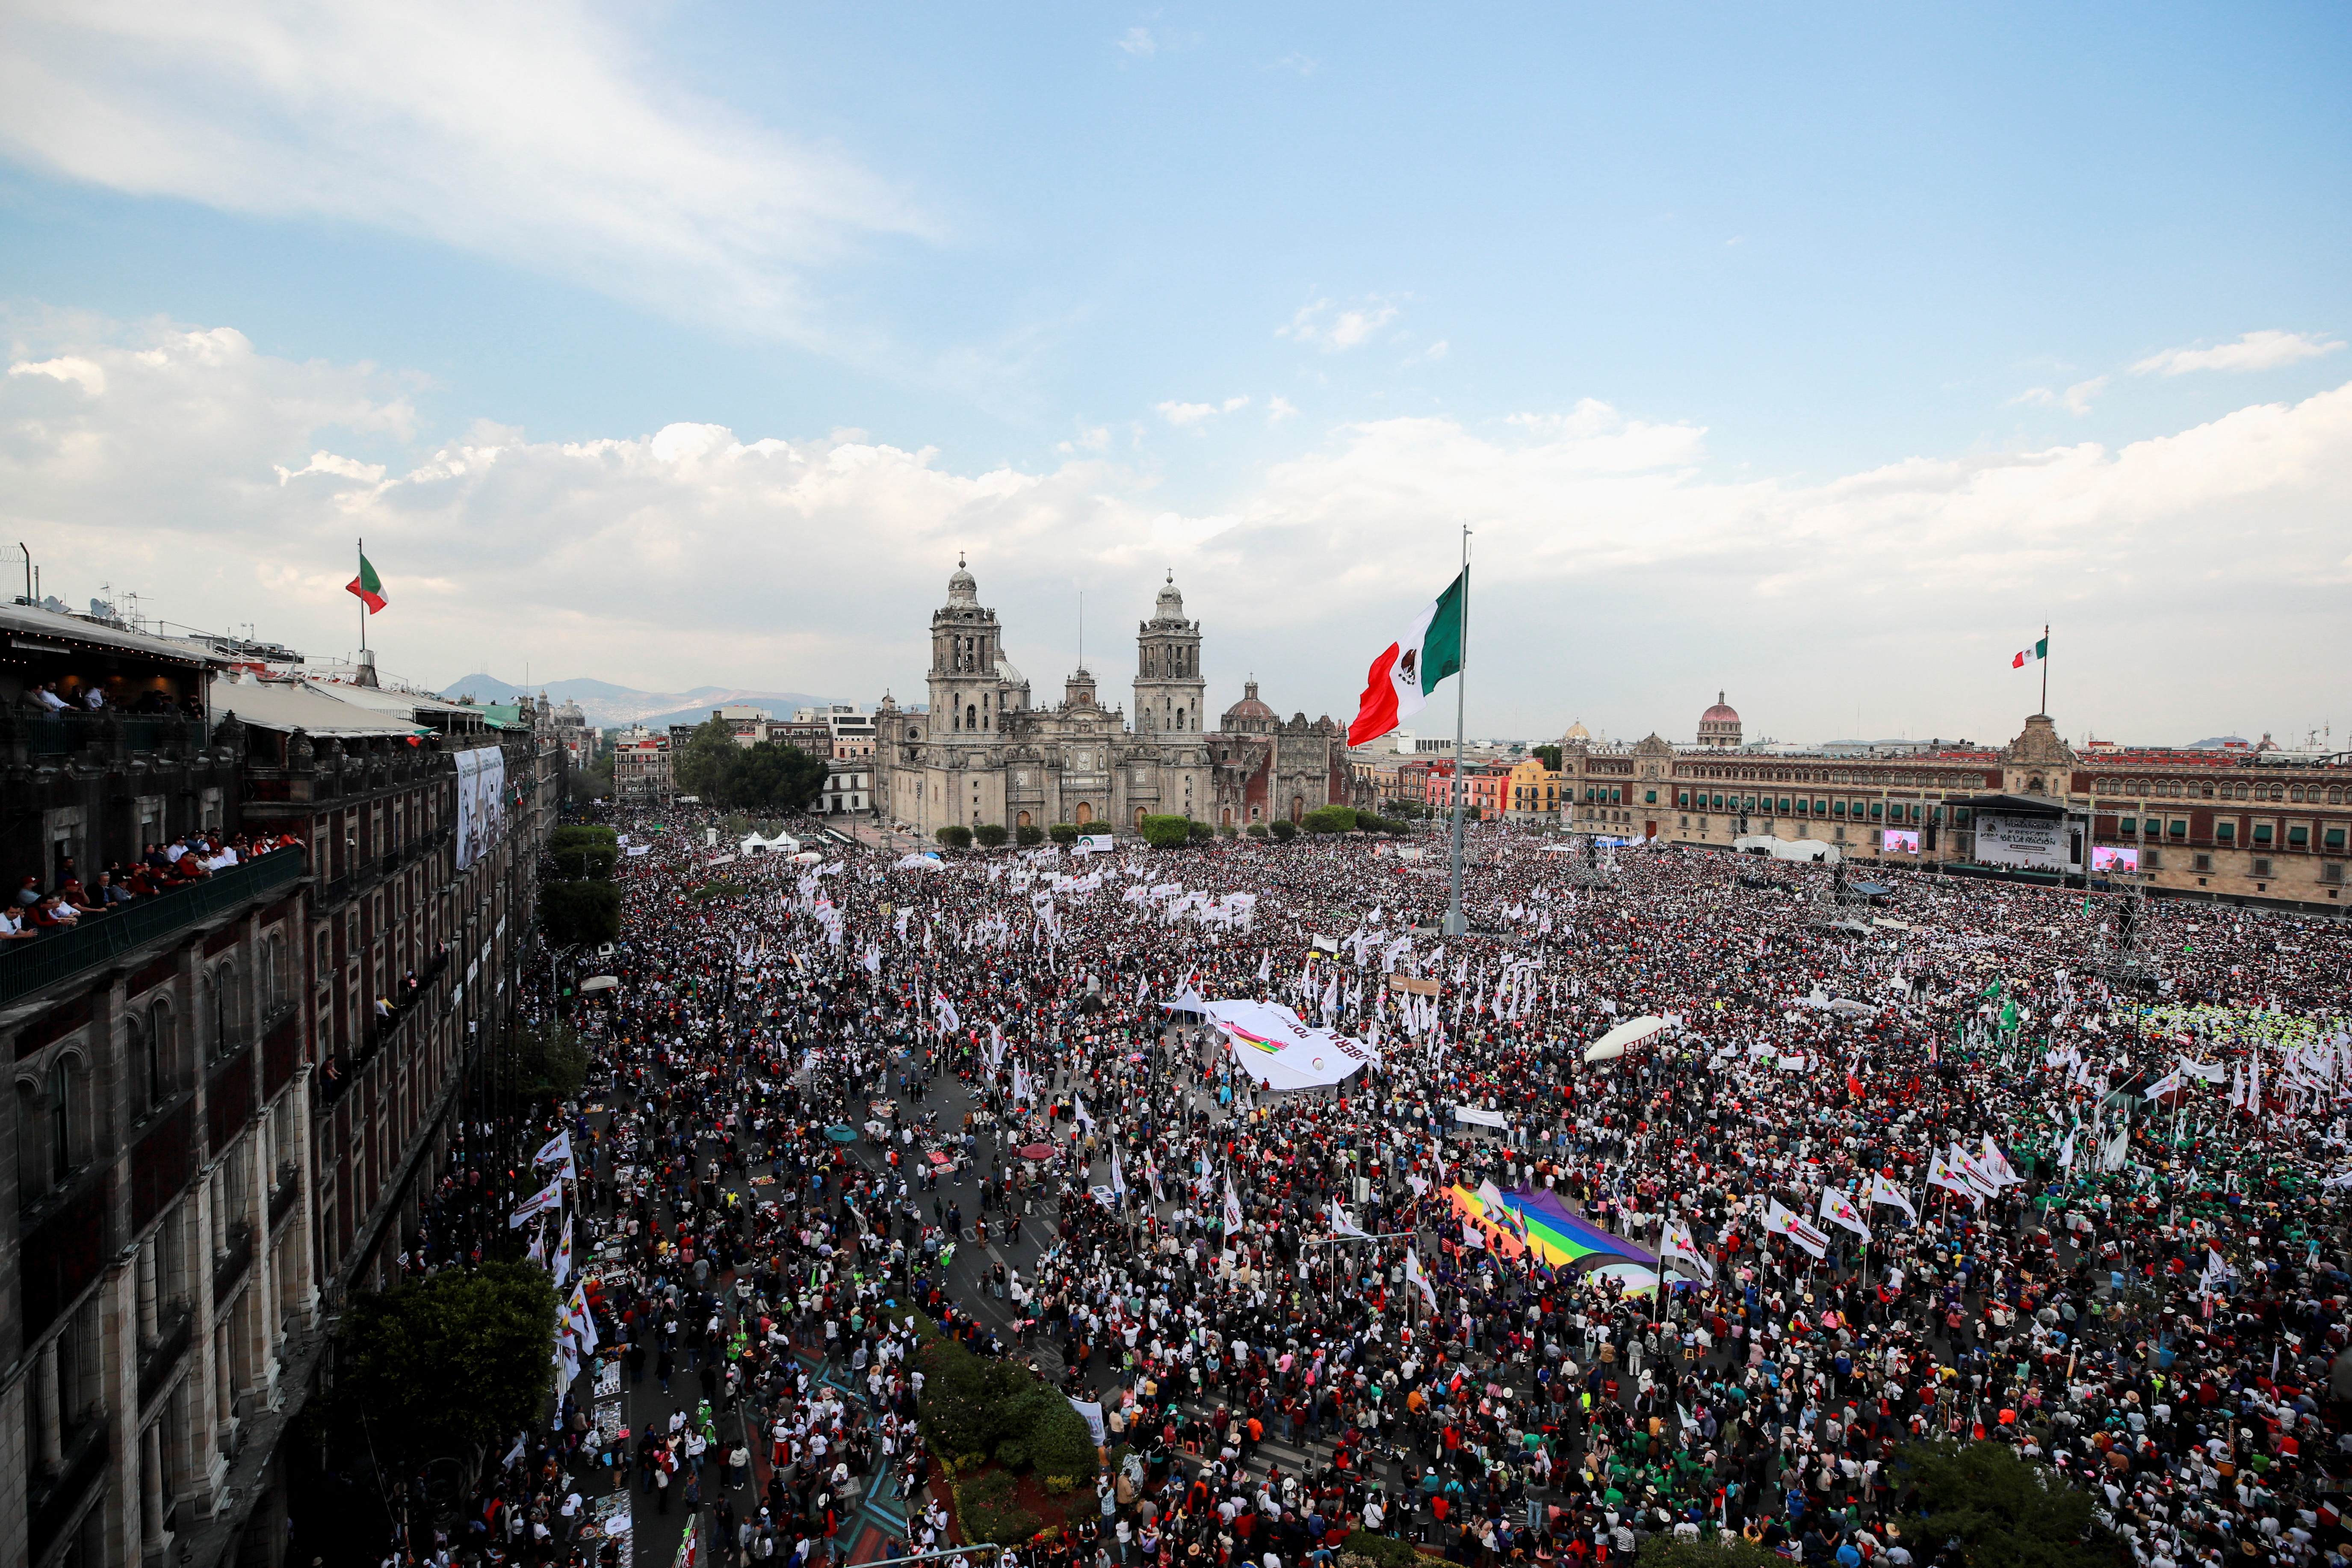 General view of the Zocalo square as Mexico's President Andres Manuel Lopez Obrador delivers a speech during an event to mark the 85th anniversary of the expropriation of foreign oil firms, at the Zocalo square, in Mexico City, Mexico March 18, 2023. REUTERS/Henry Romero